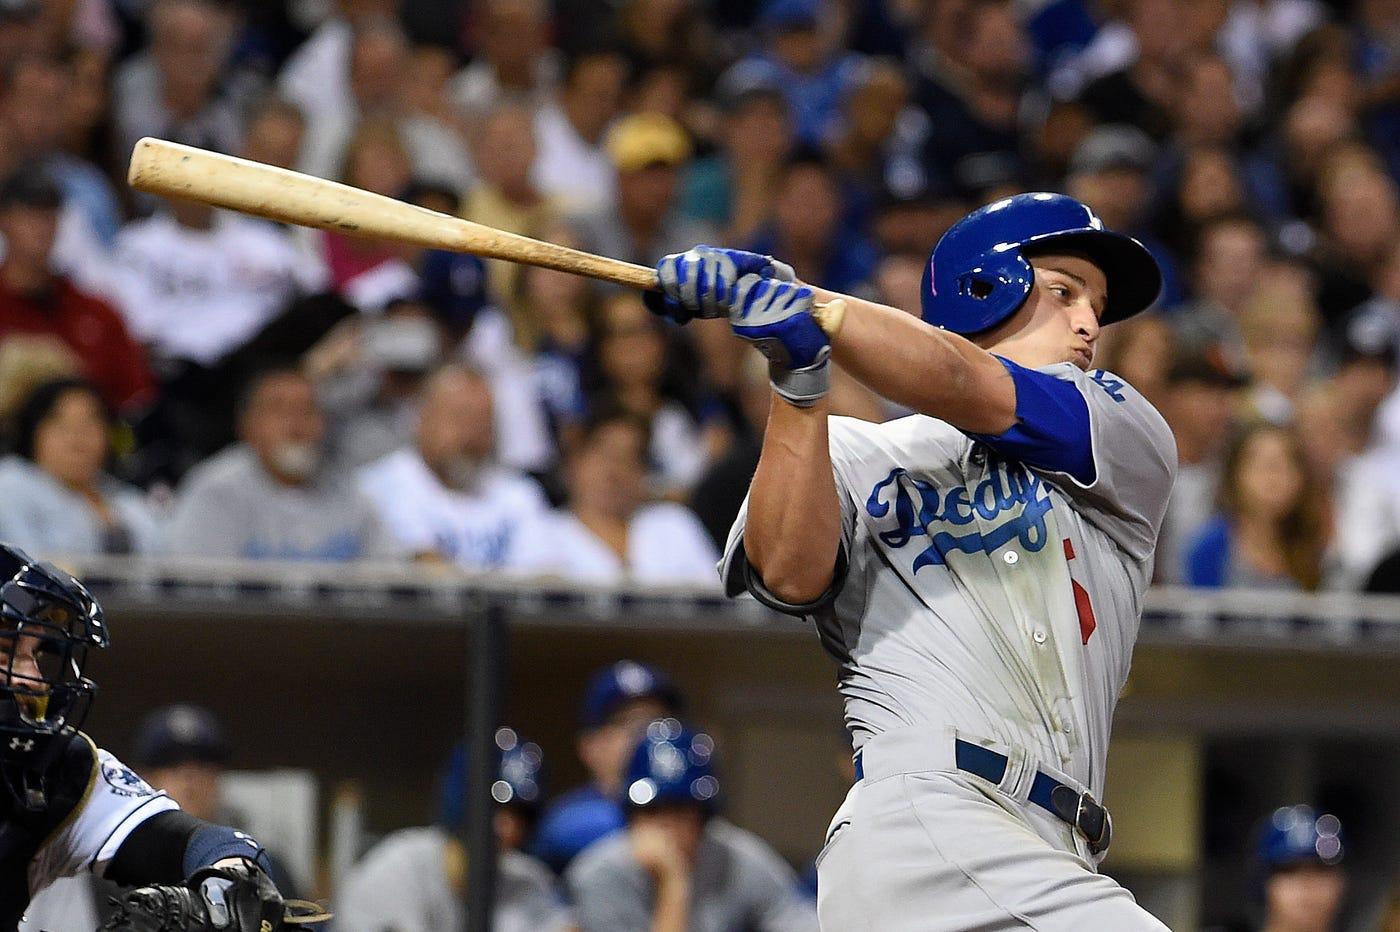 Welcome to the bigs: The story of Corey Seager's MLB debut, by Cary  Osborne